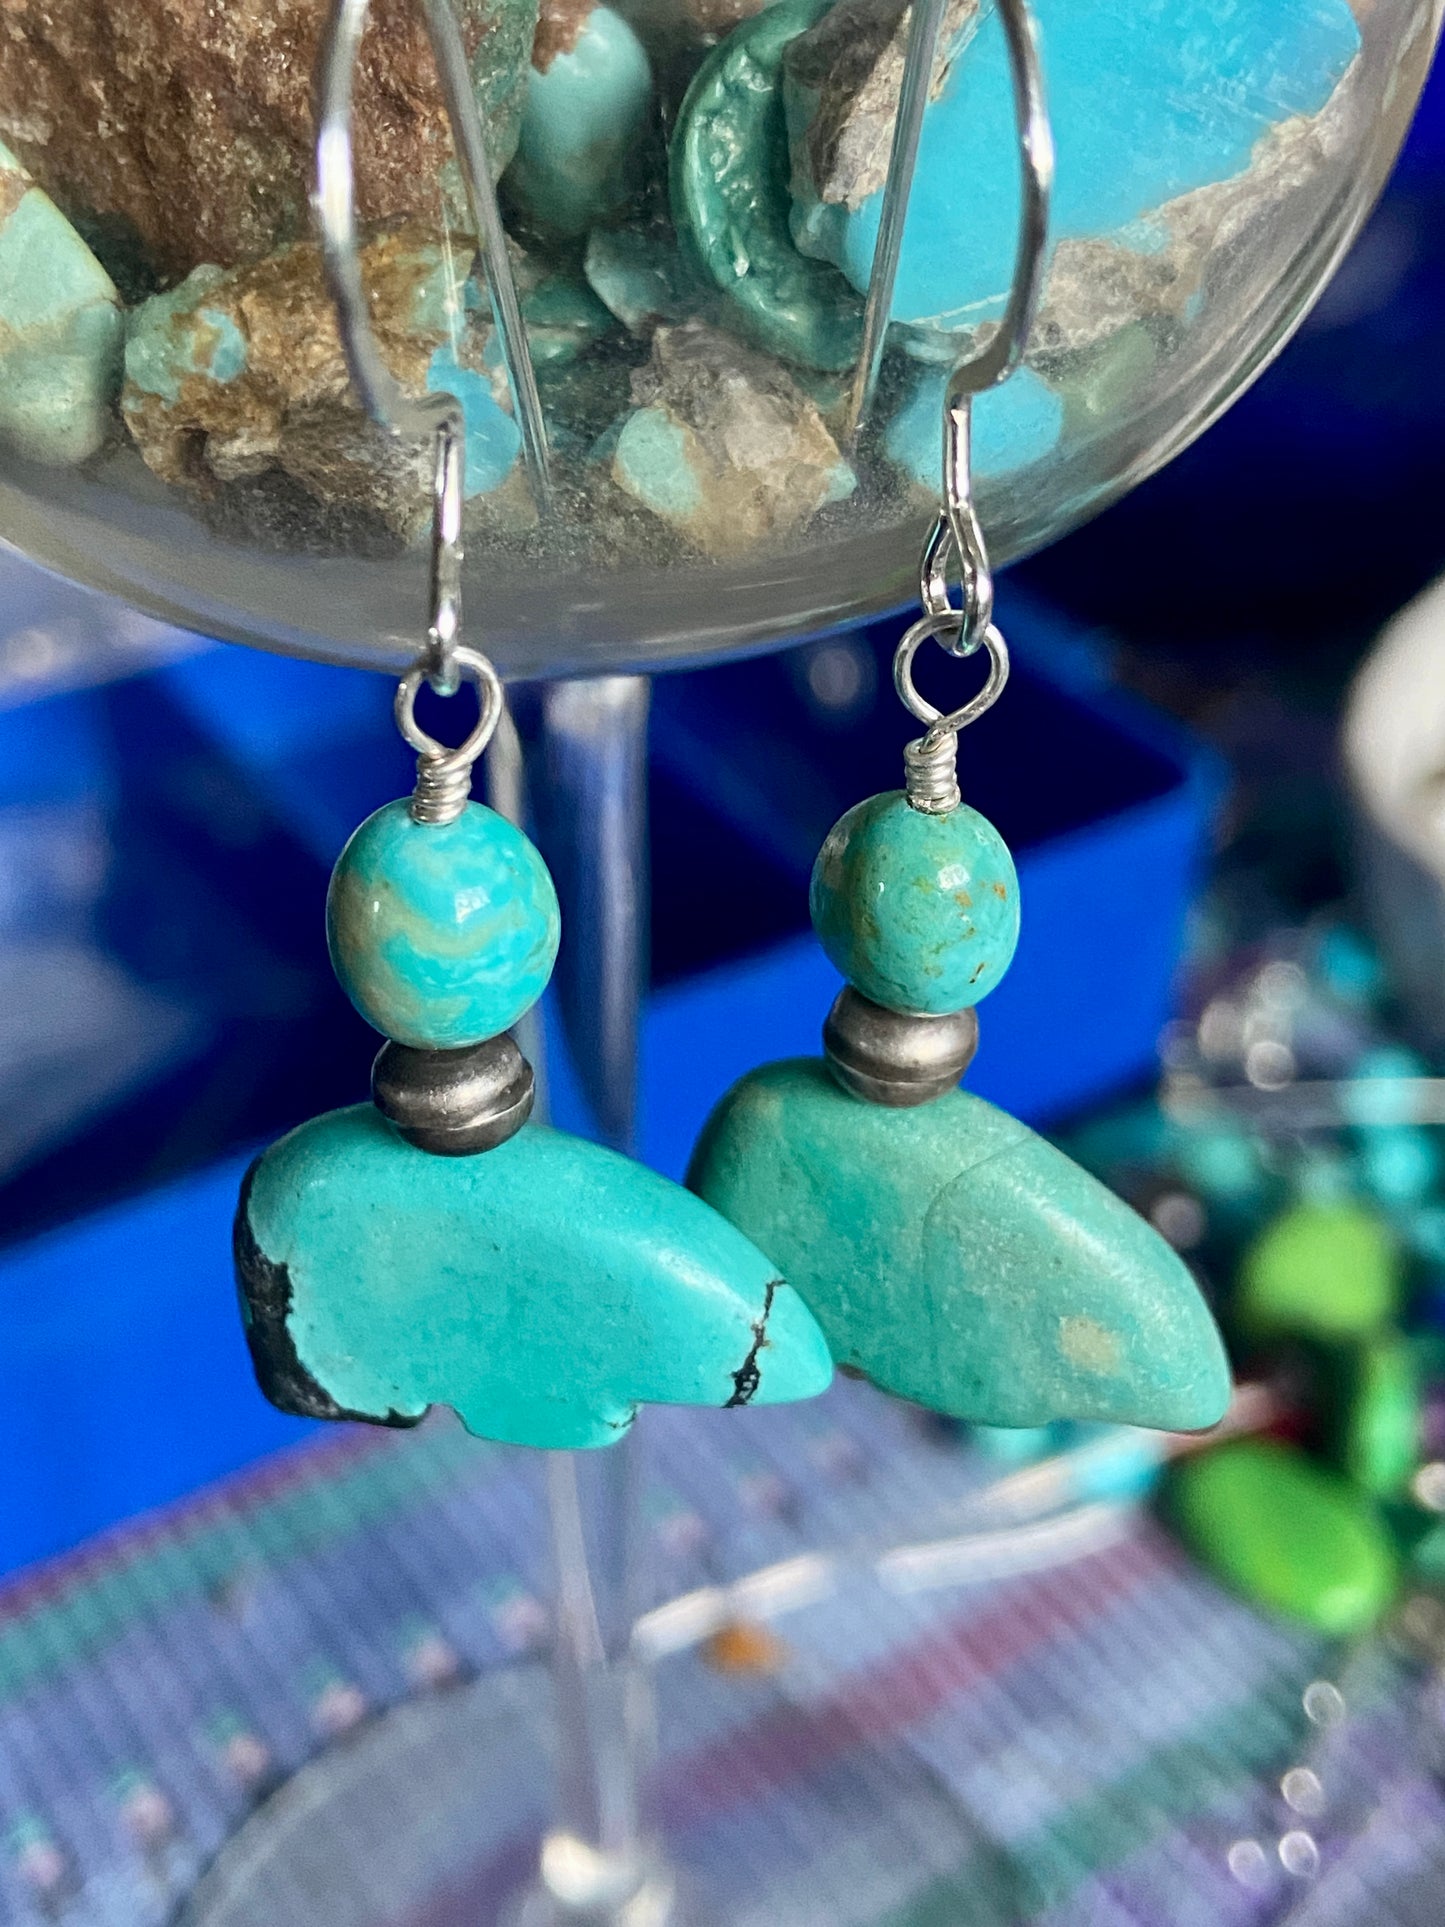 Turquoise Fetish Bear Earrings with  Kingman Turquoise beads on Silver wire All handmade